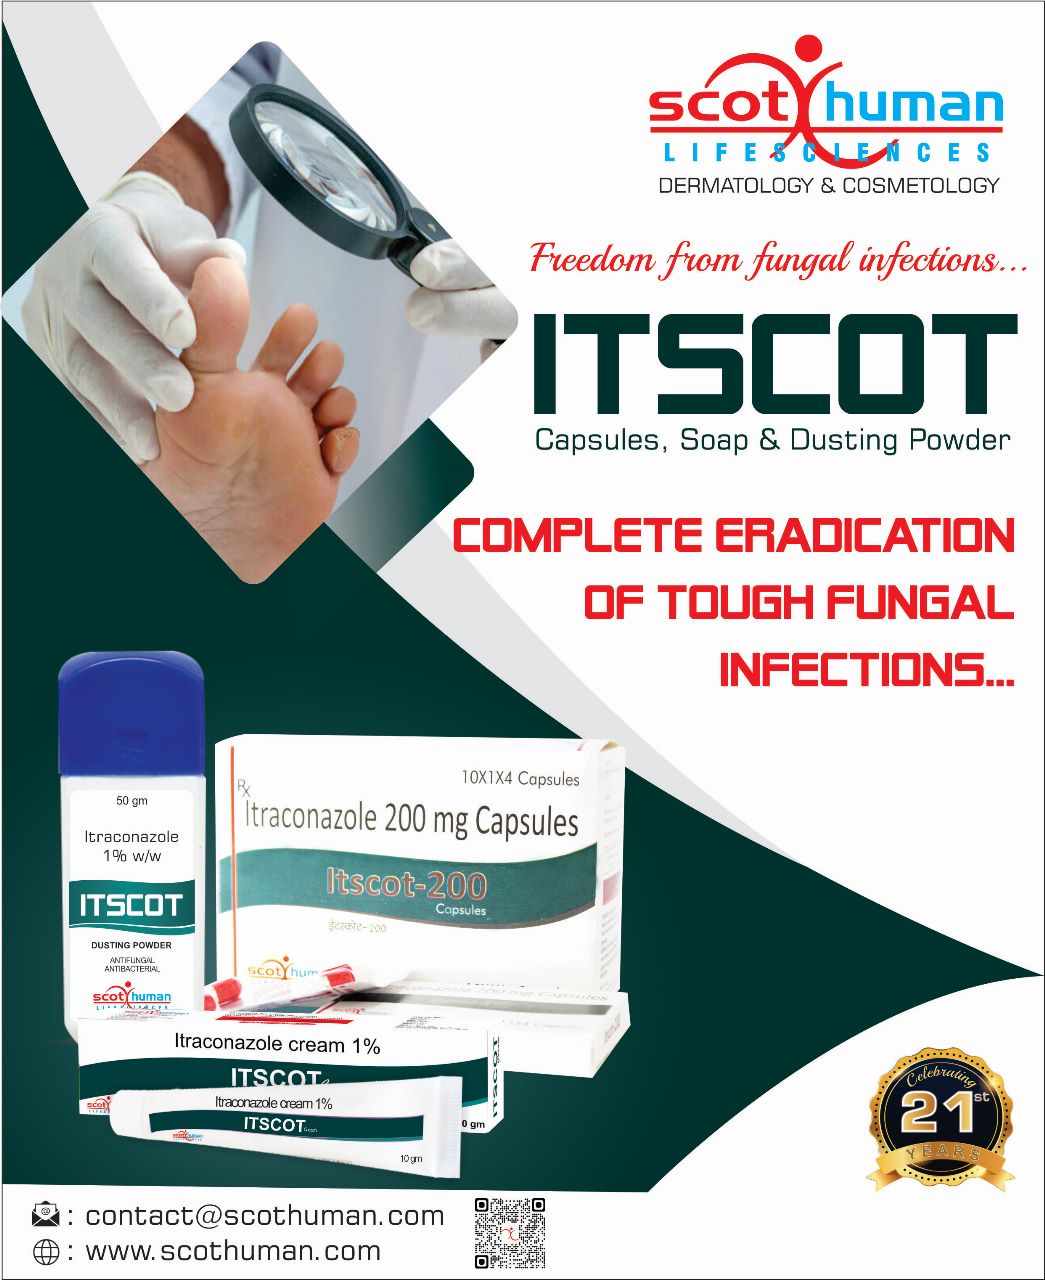 Product Name: Itscot, Compositions of Itscot are Complete Eradication of togh Fungal Infections - Pharma Drugs and Chemicals